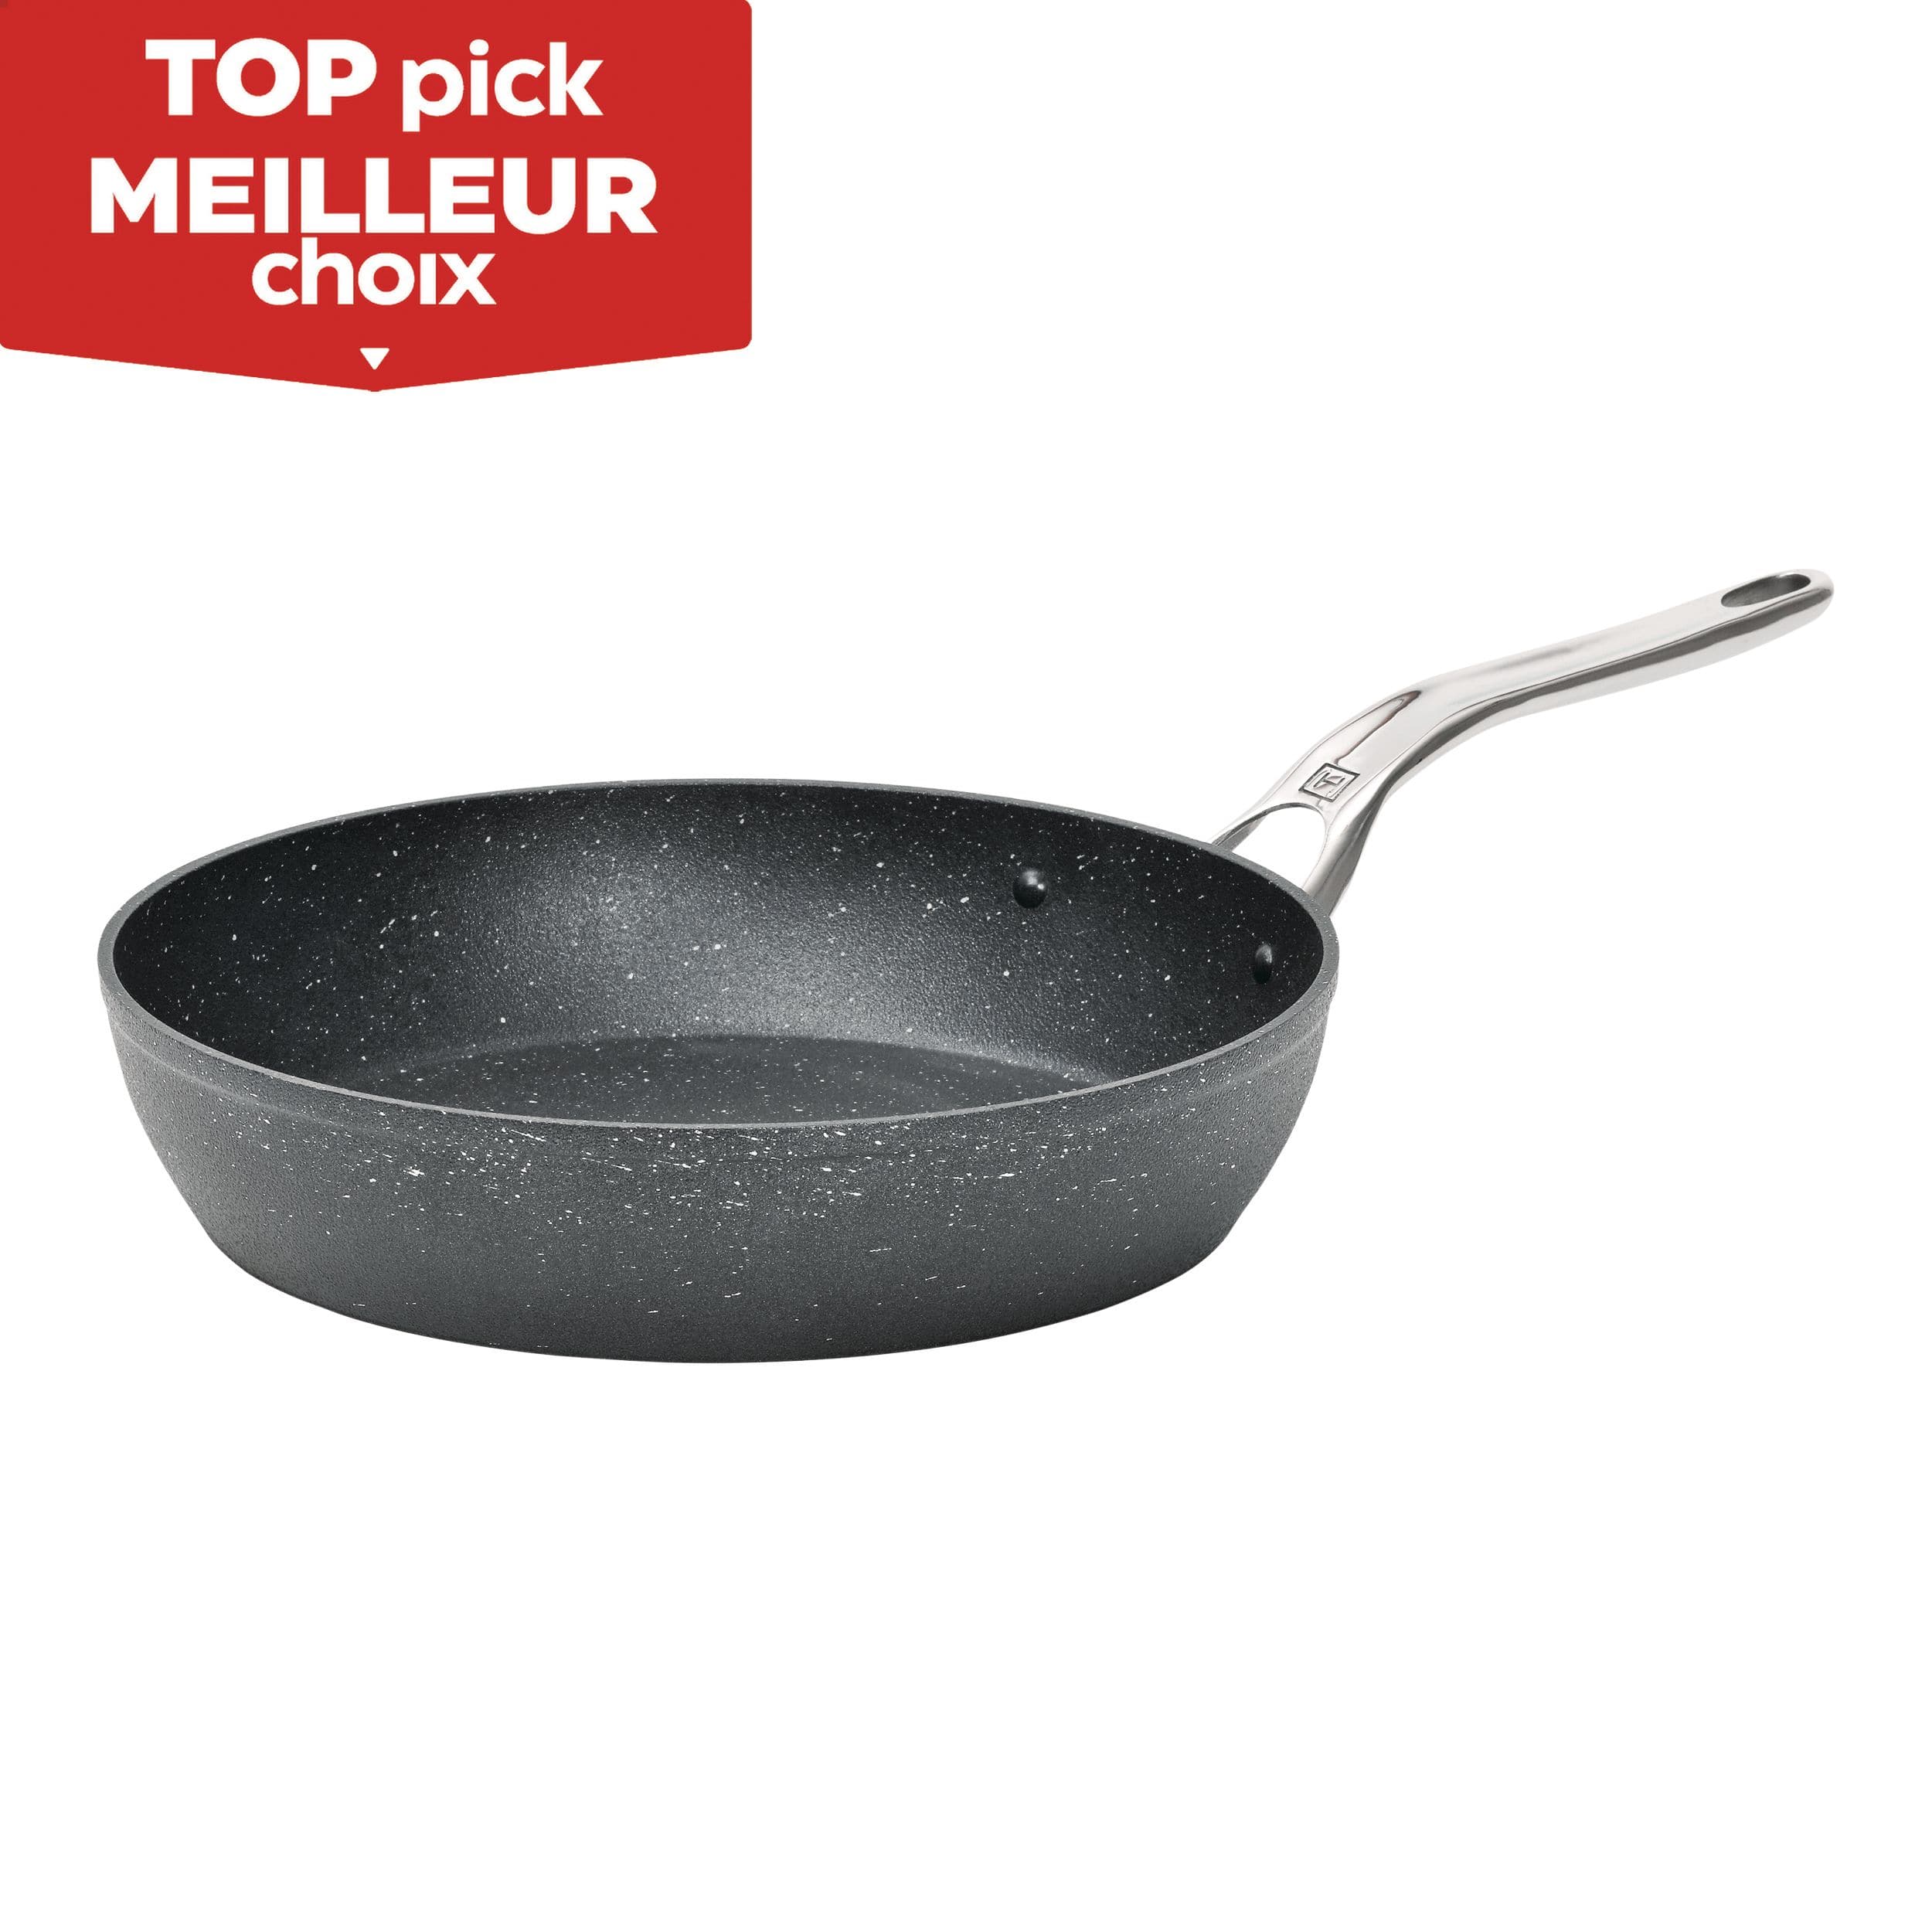 https://media-www.canadiantire.ca/product/living/kitchen/cookware/1427073/heritage-rock-30cm-non-stick-frypan-a1d8f789-3587-4cb5-ad53-740b659869c1-jpgrendition.jpg